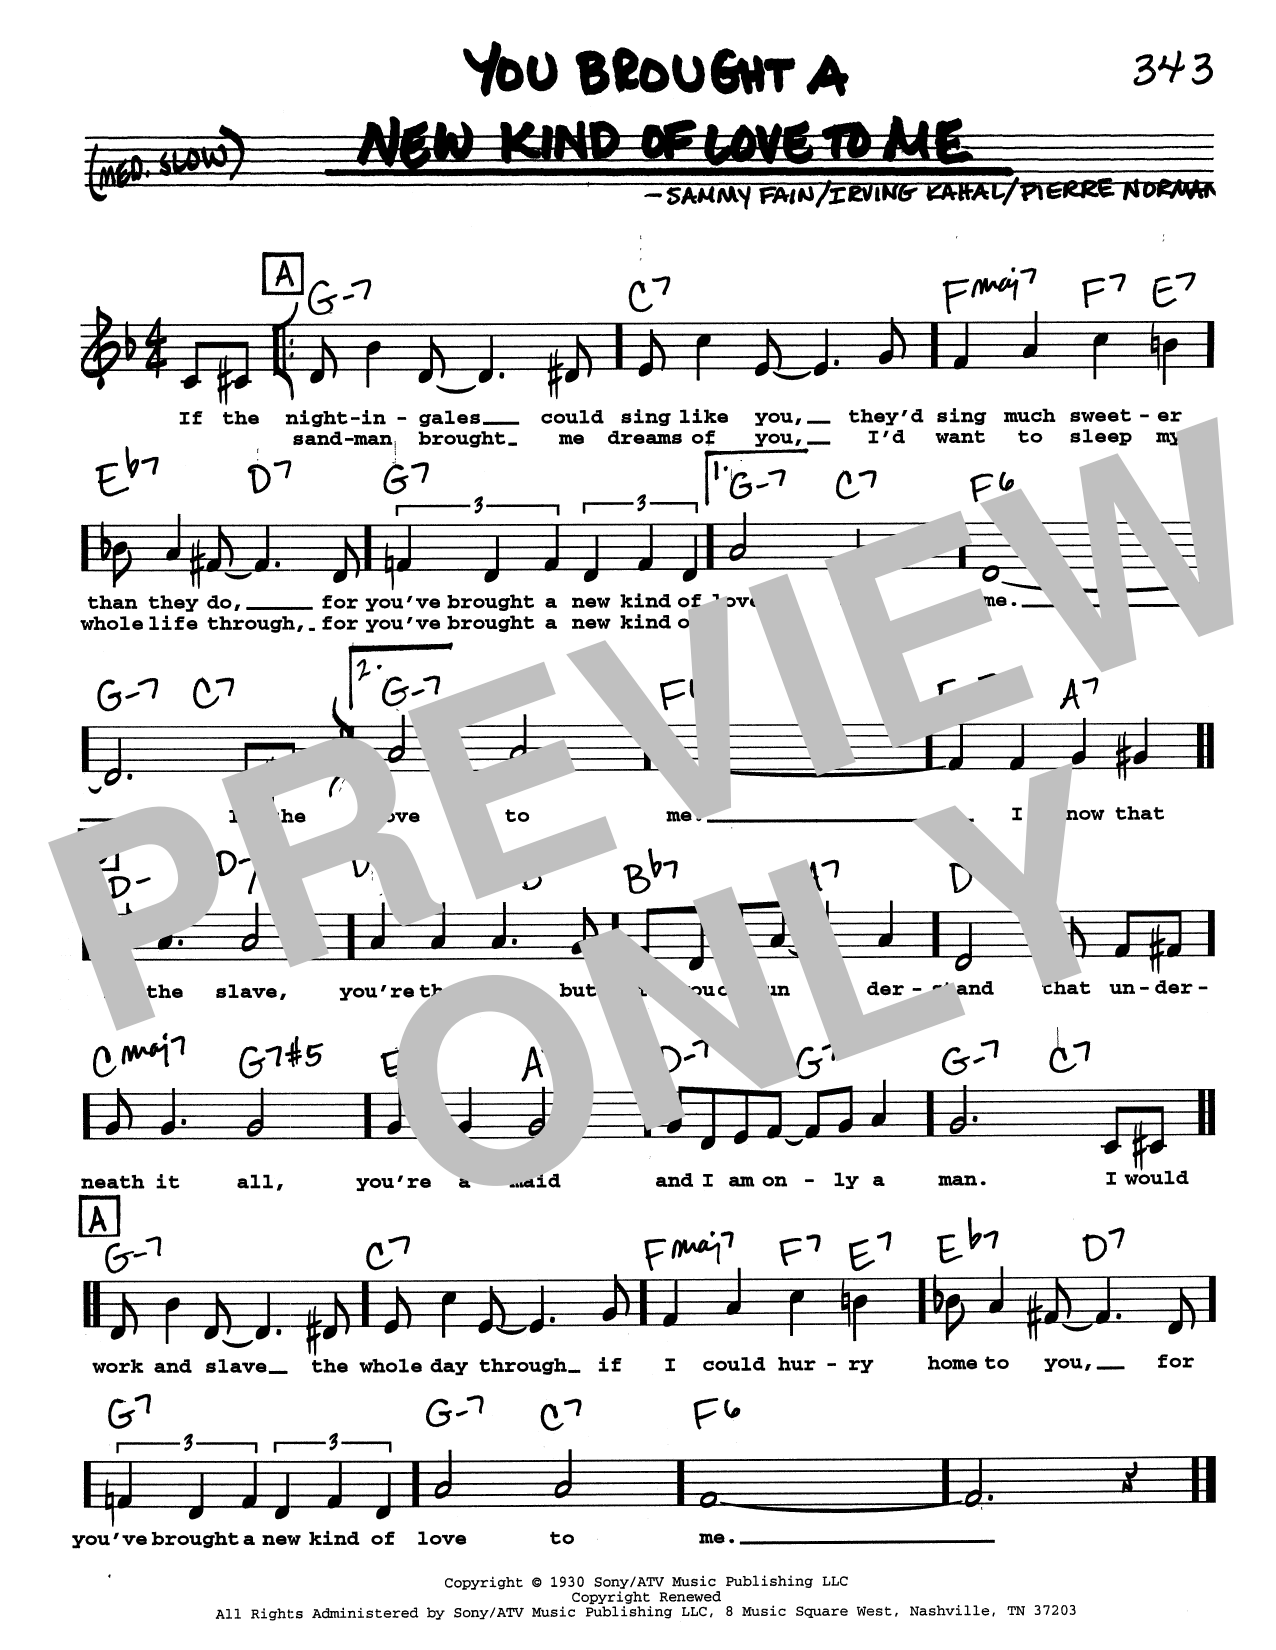 Sammy Fain You Brought A New Kind Of Love To Me (Low Voice) sheet music notes printable PDF score